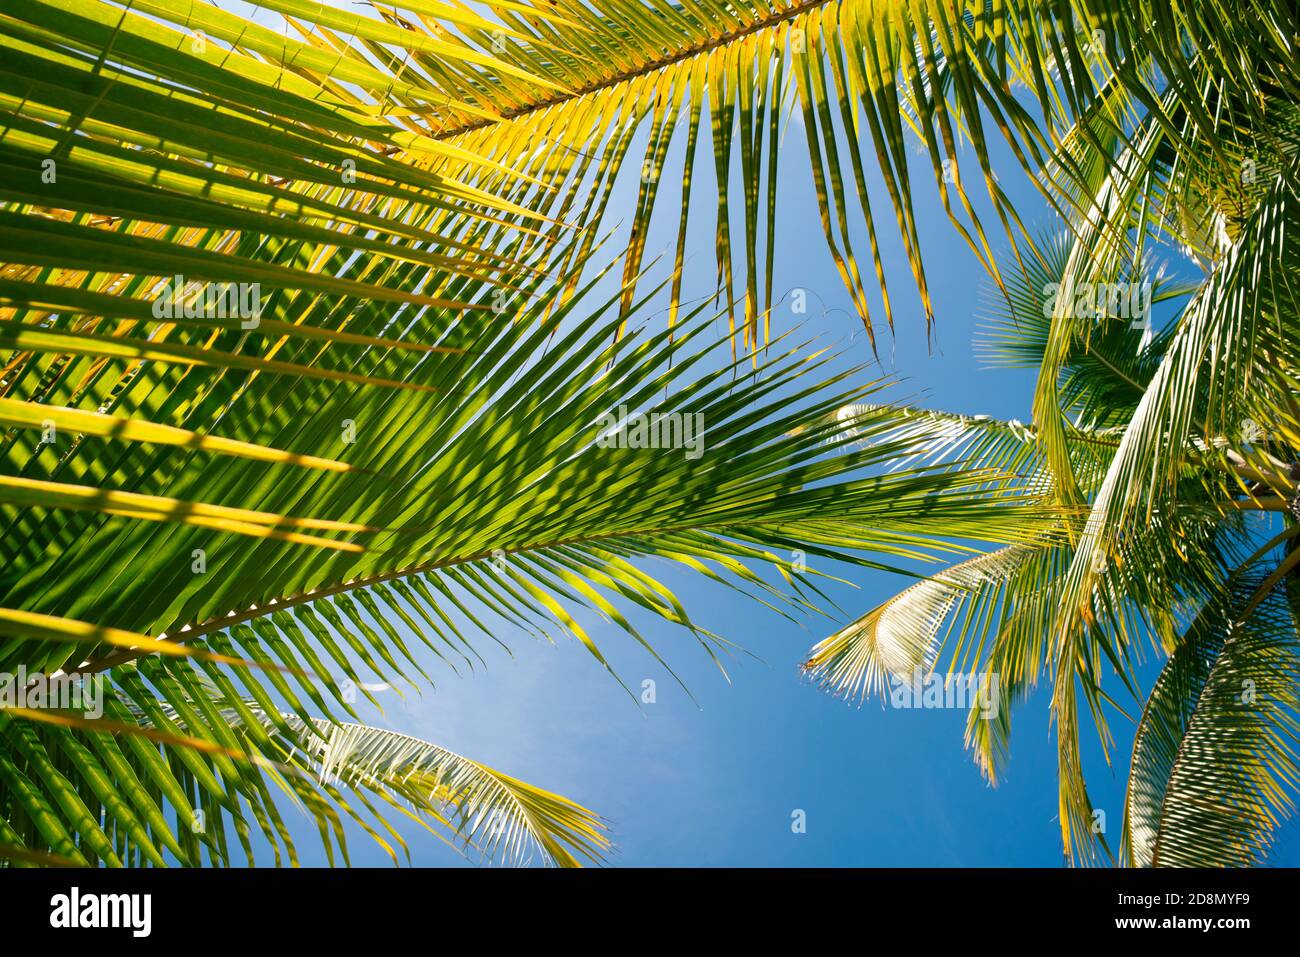 Close-up shot of sunlit, lush green tropical palm leaves. Natural, abstract background photo. Coiba National Park, Panama, Central America Stock Photo